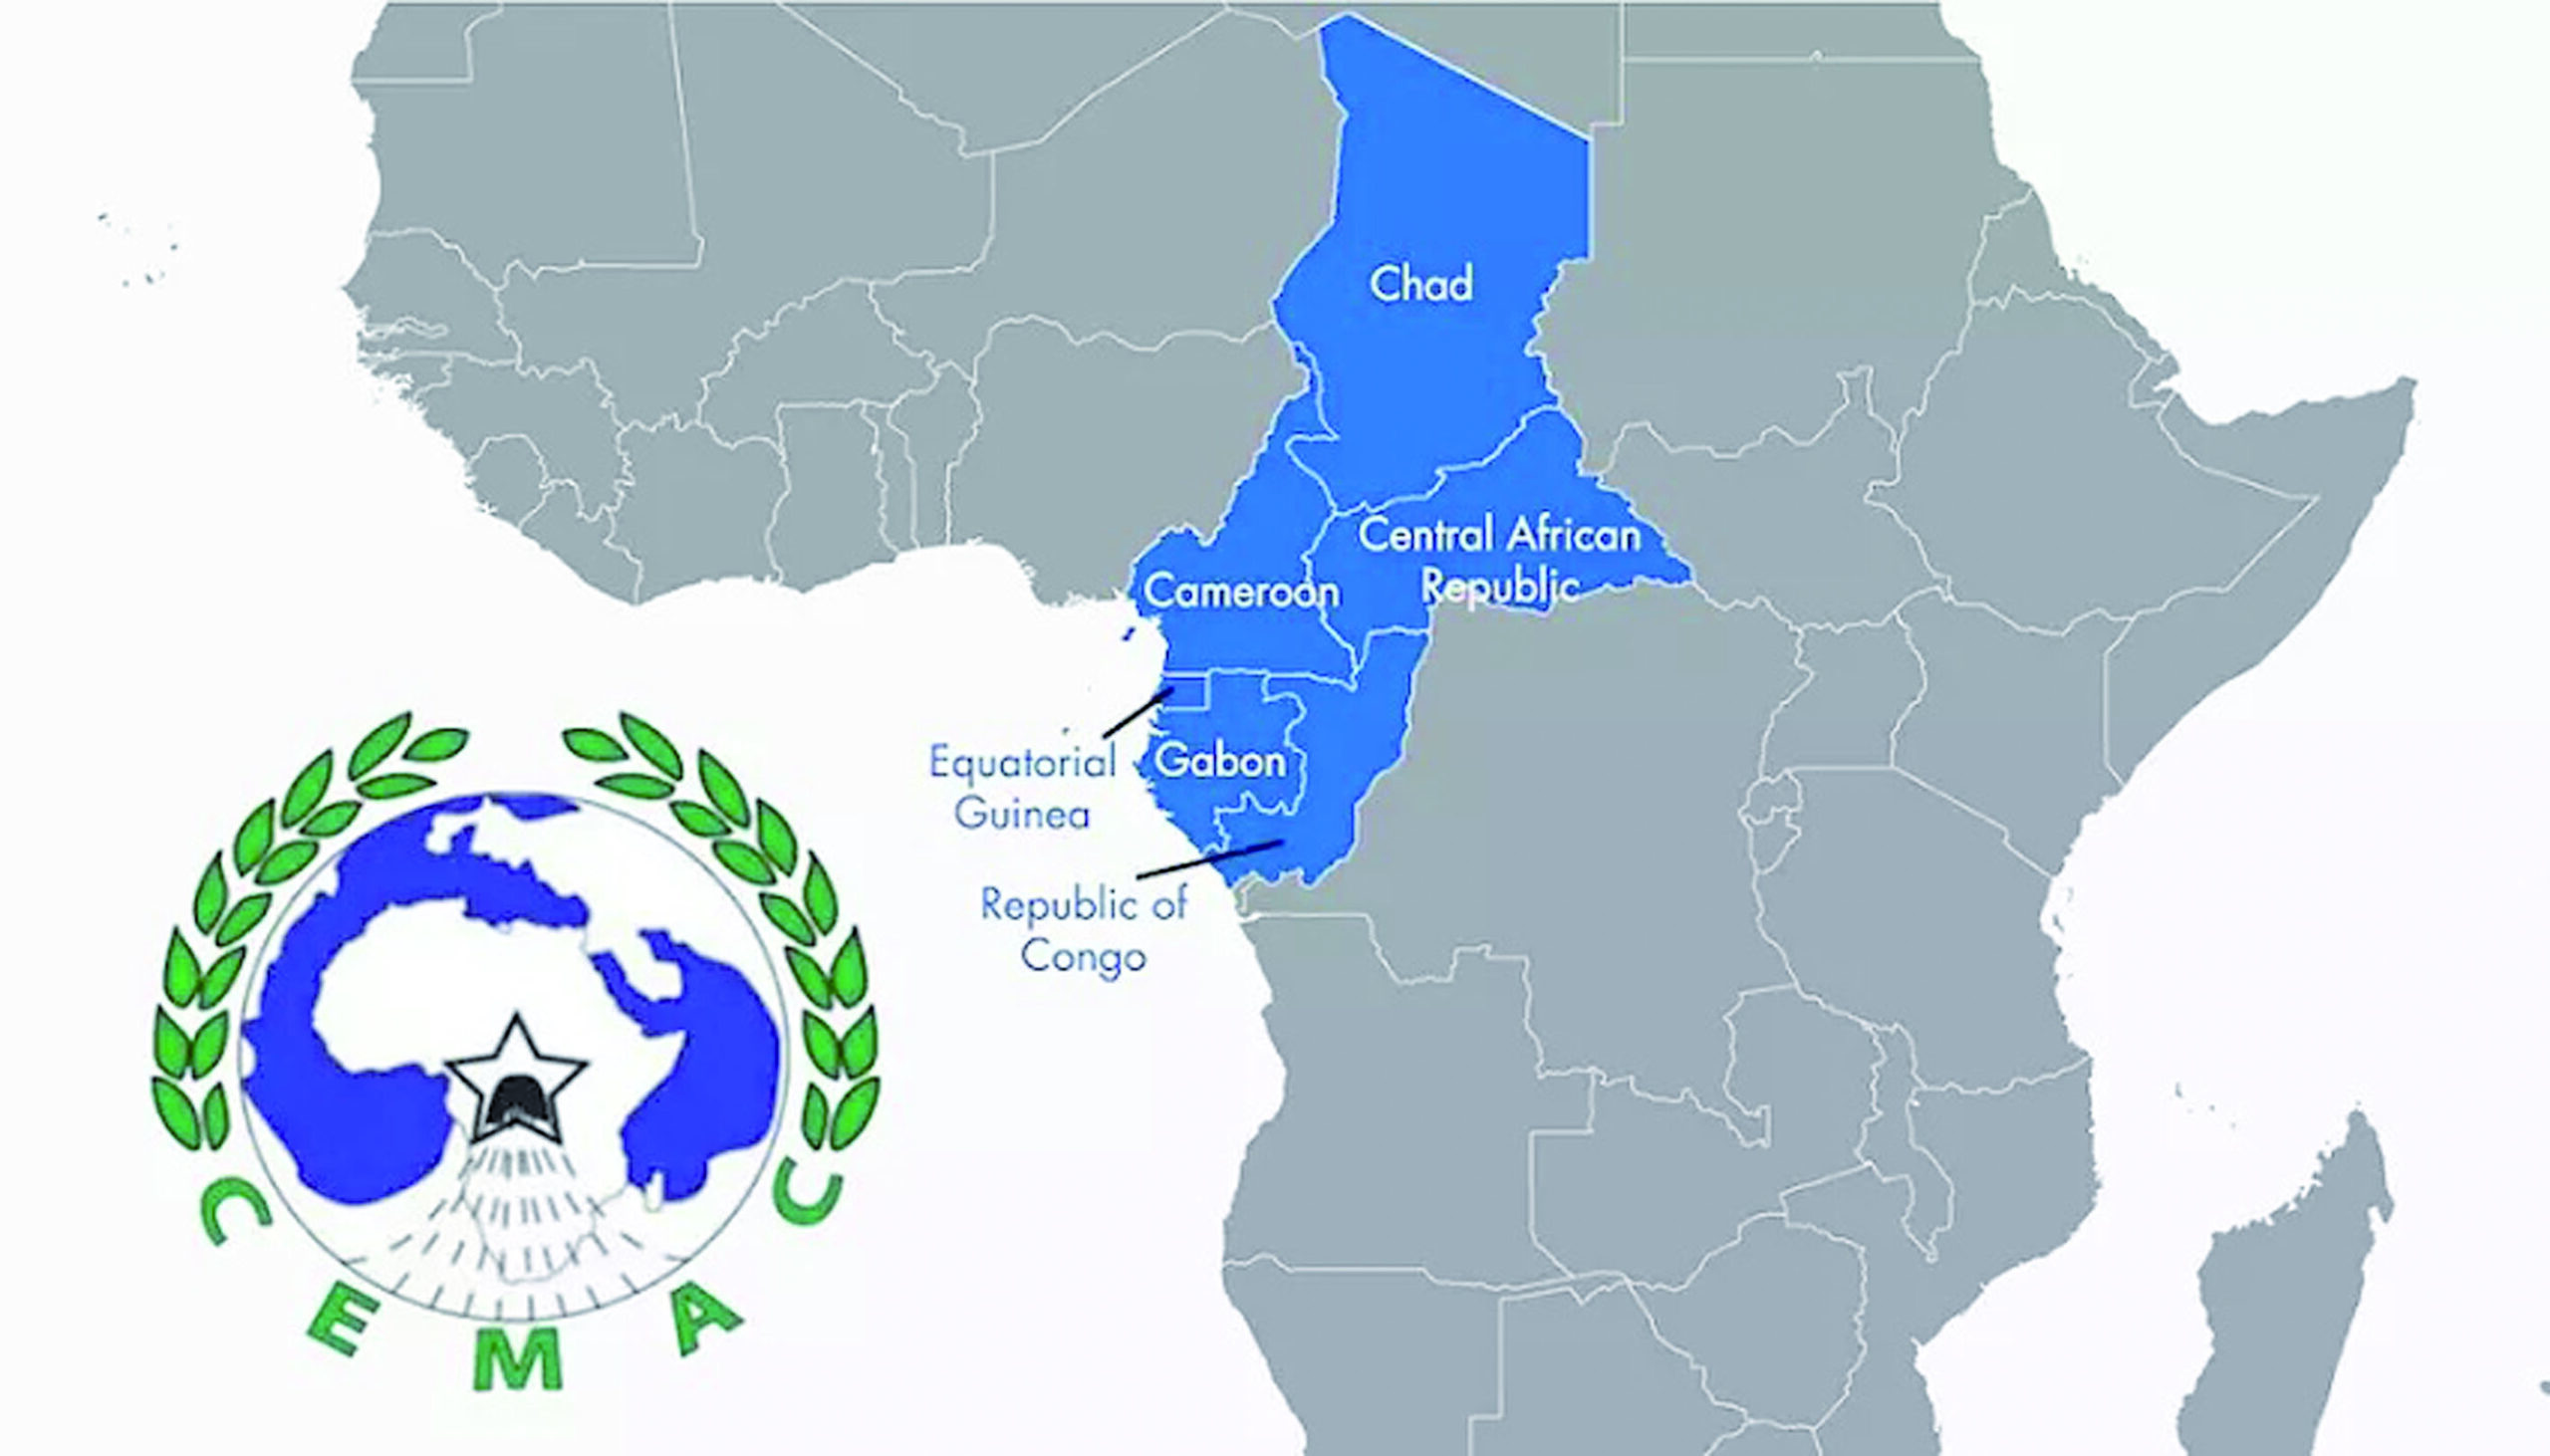 CONJUNCTURE THE IMF FORECASTS A POSITIVE OUTLOOK FOR CEMAC